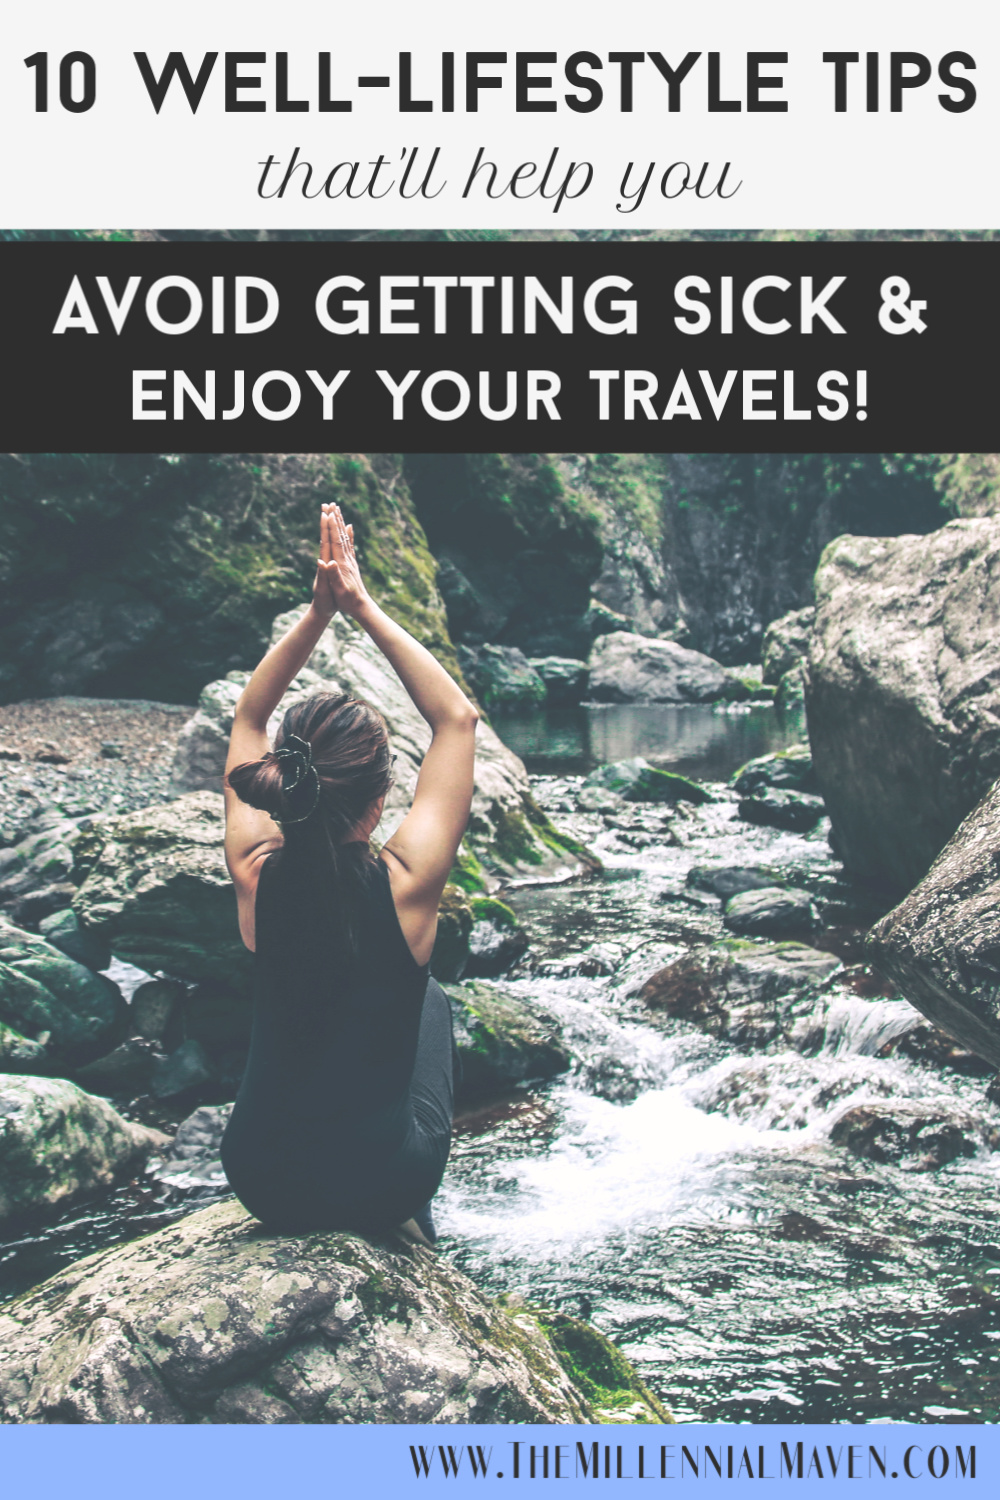 10 Well-Lifestyle Tips That’ll Help You Avoid Getting Sick on Vacation || How To NOT Get Sick While Traveling || The Millennial Maven #wellnesstips #travelhealthy #travelpacking #travelbeauty #travelplanning